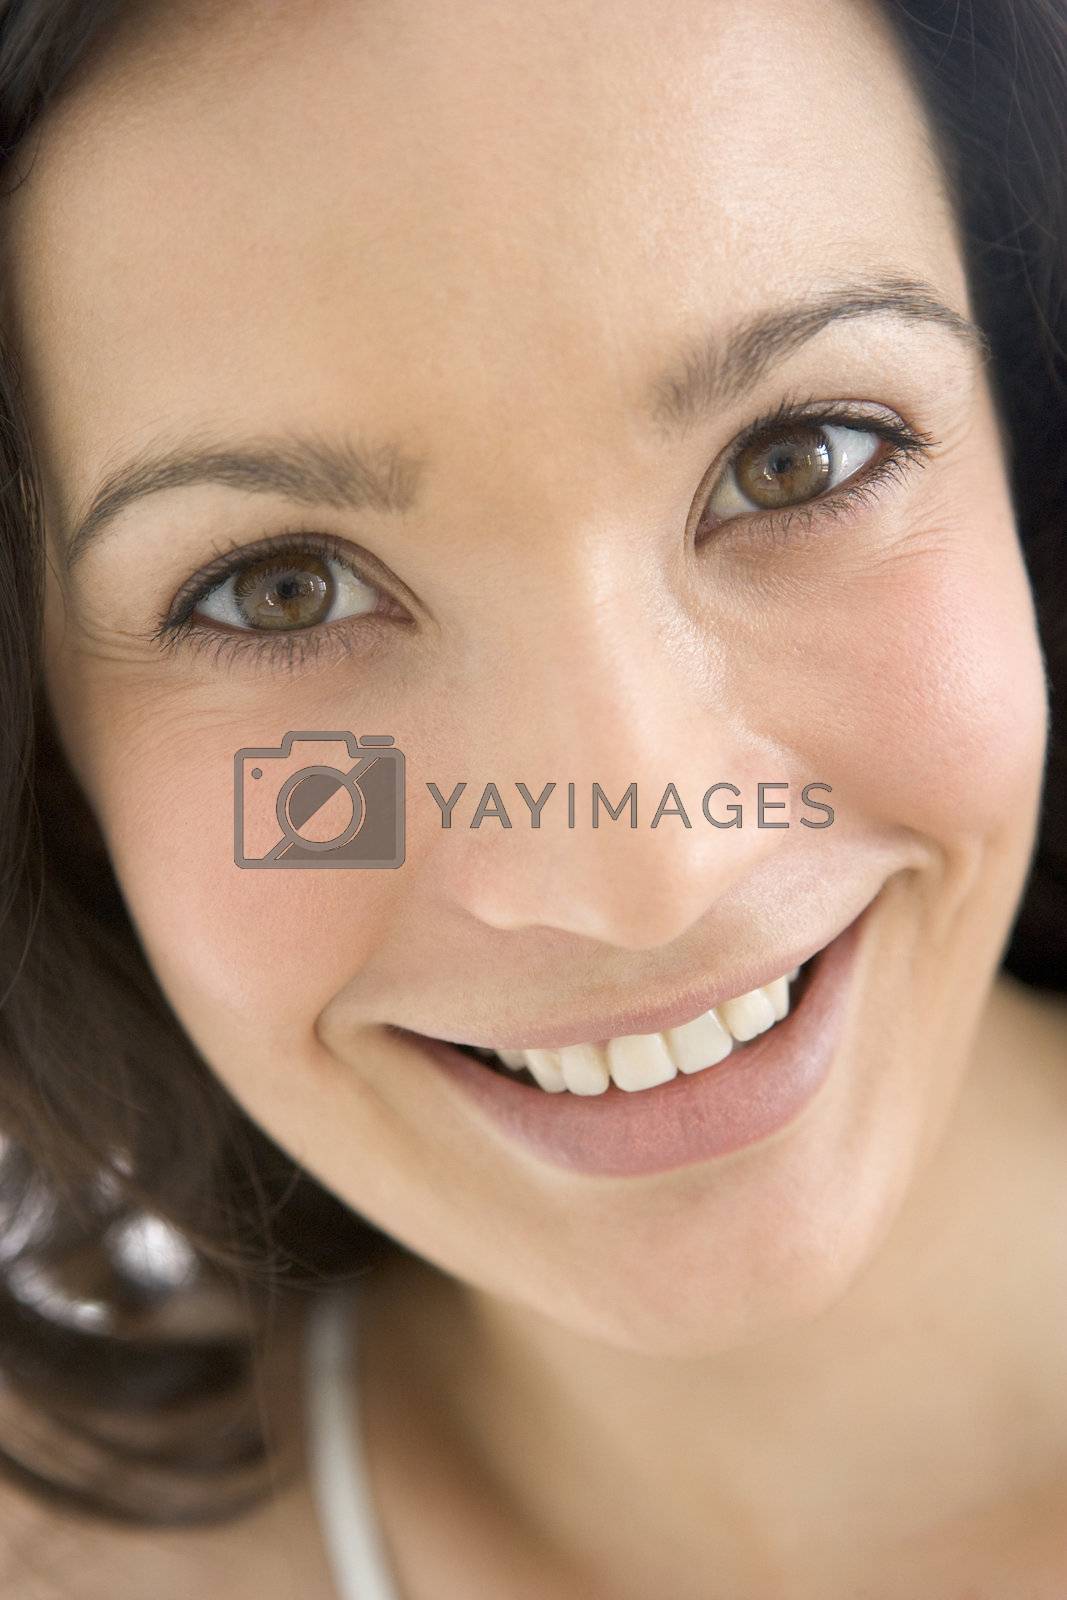 Royalty free image of Head shot of woman smiling by MonkeyBusiness